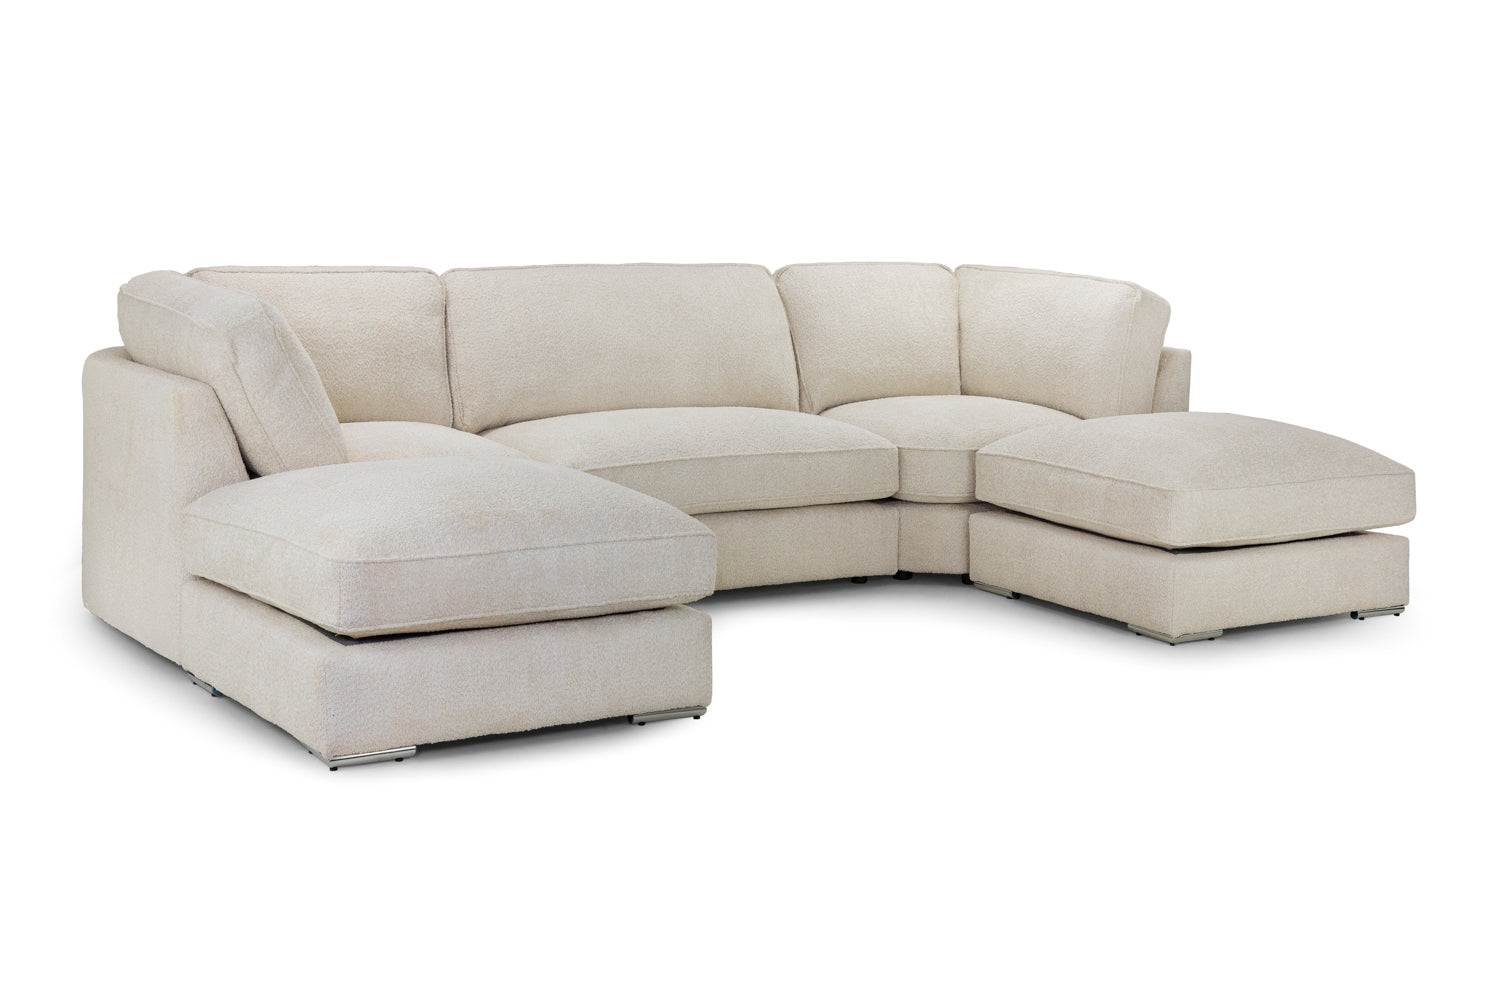 Stylish and comfortable Inga U Shape Beige Corner Sofa upholstered in soft bouclé fabric with large movable footstools and low-profile chrome feet.